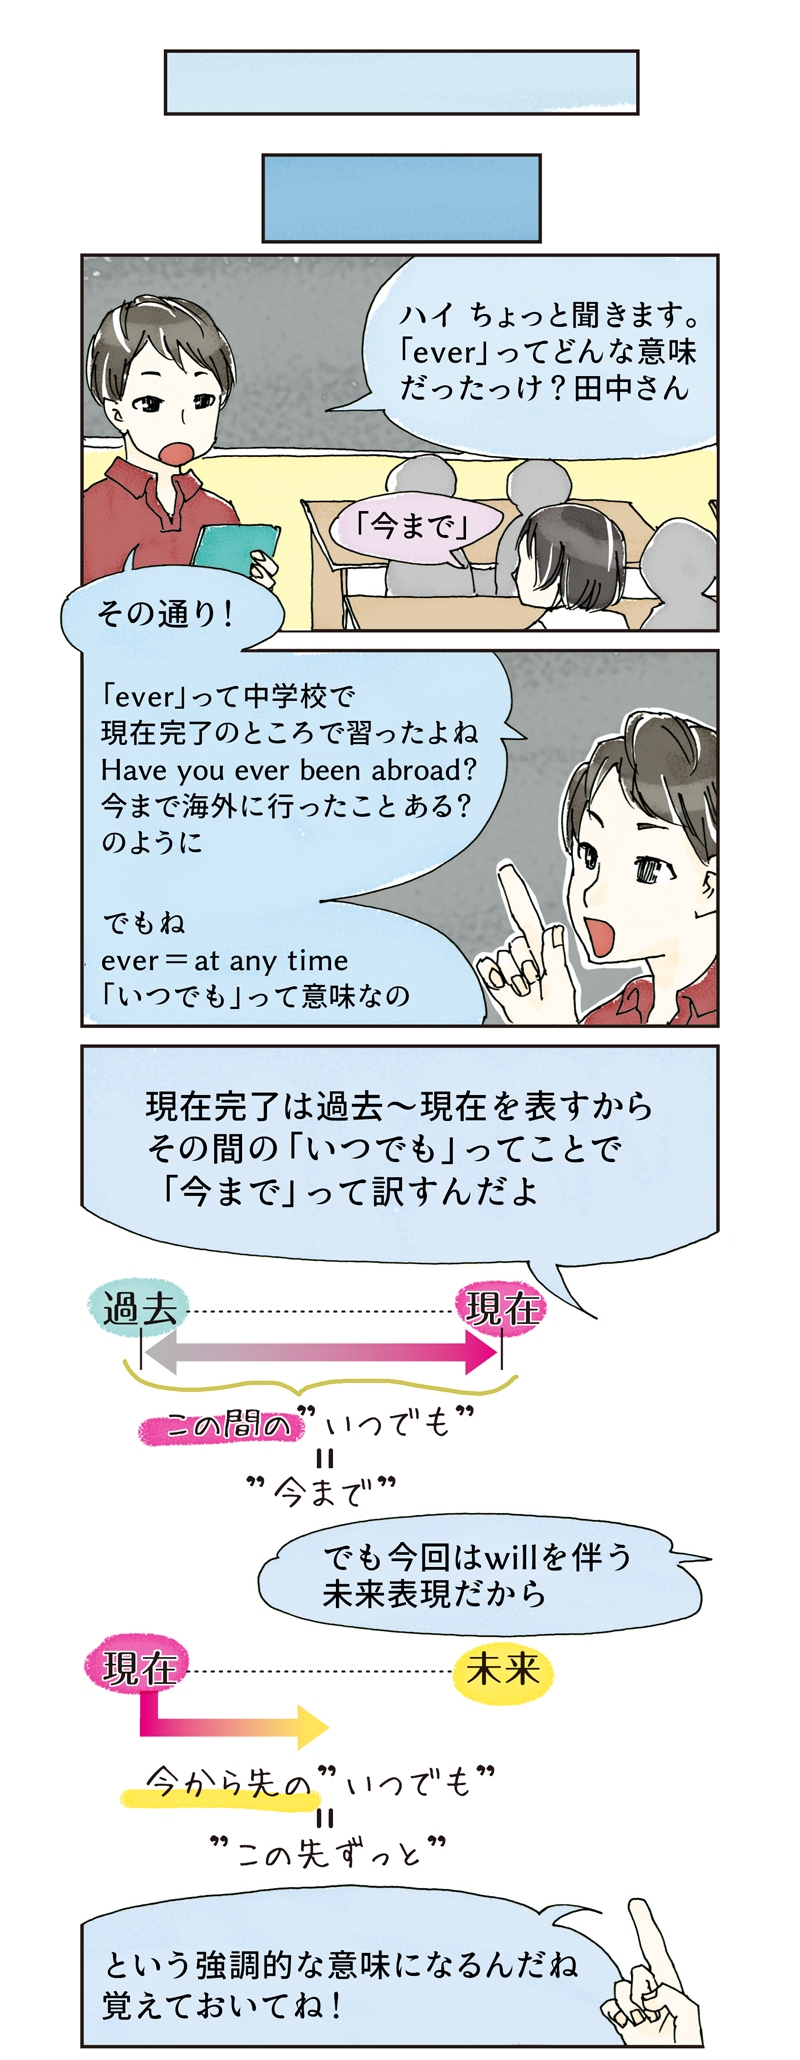 everの解説